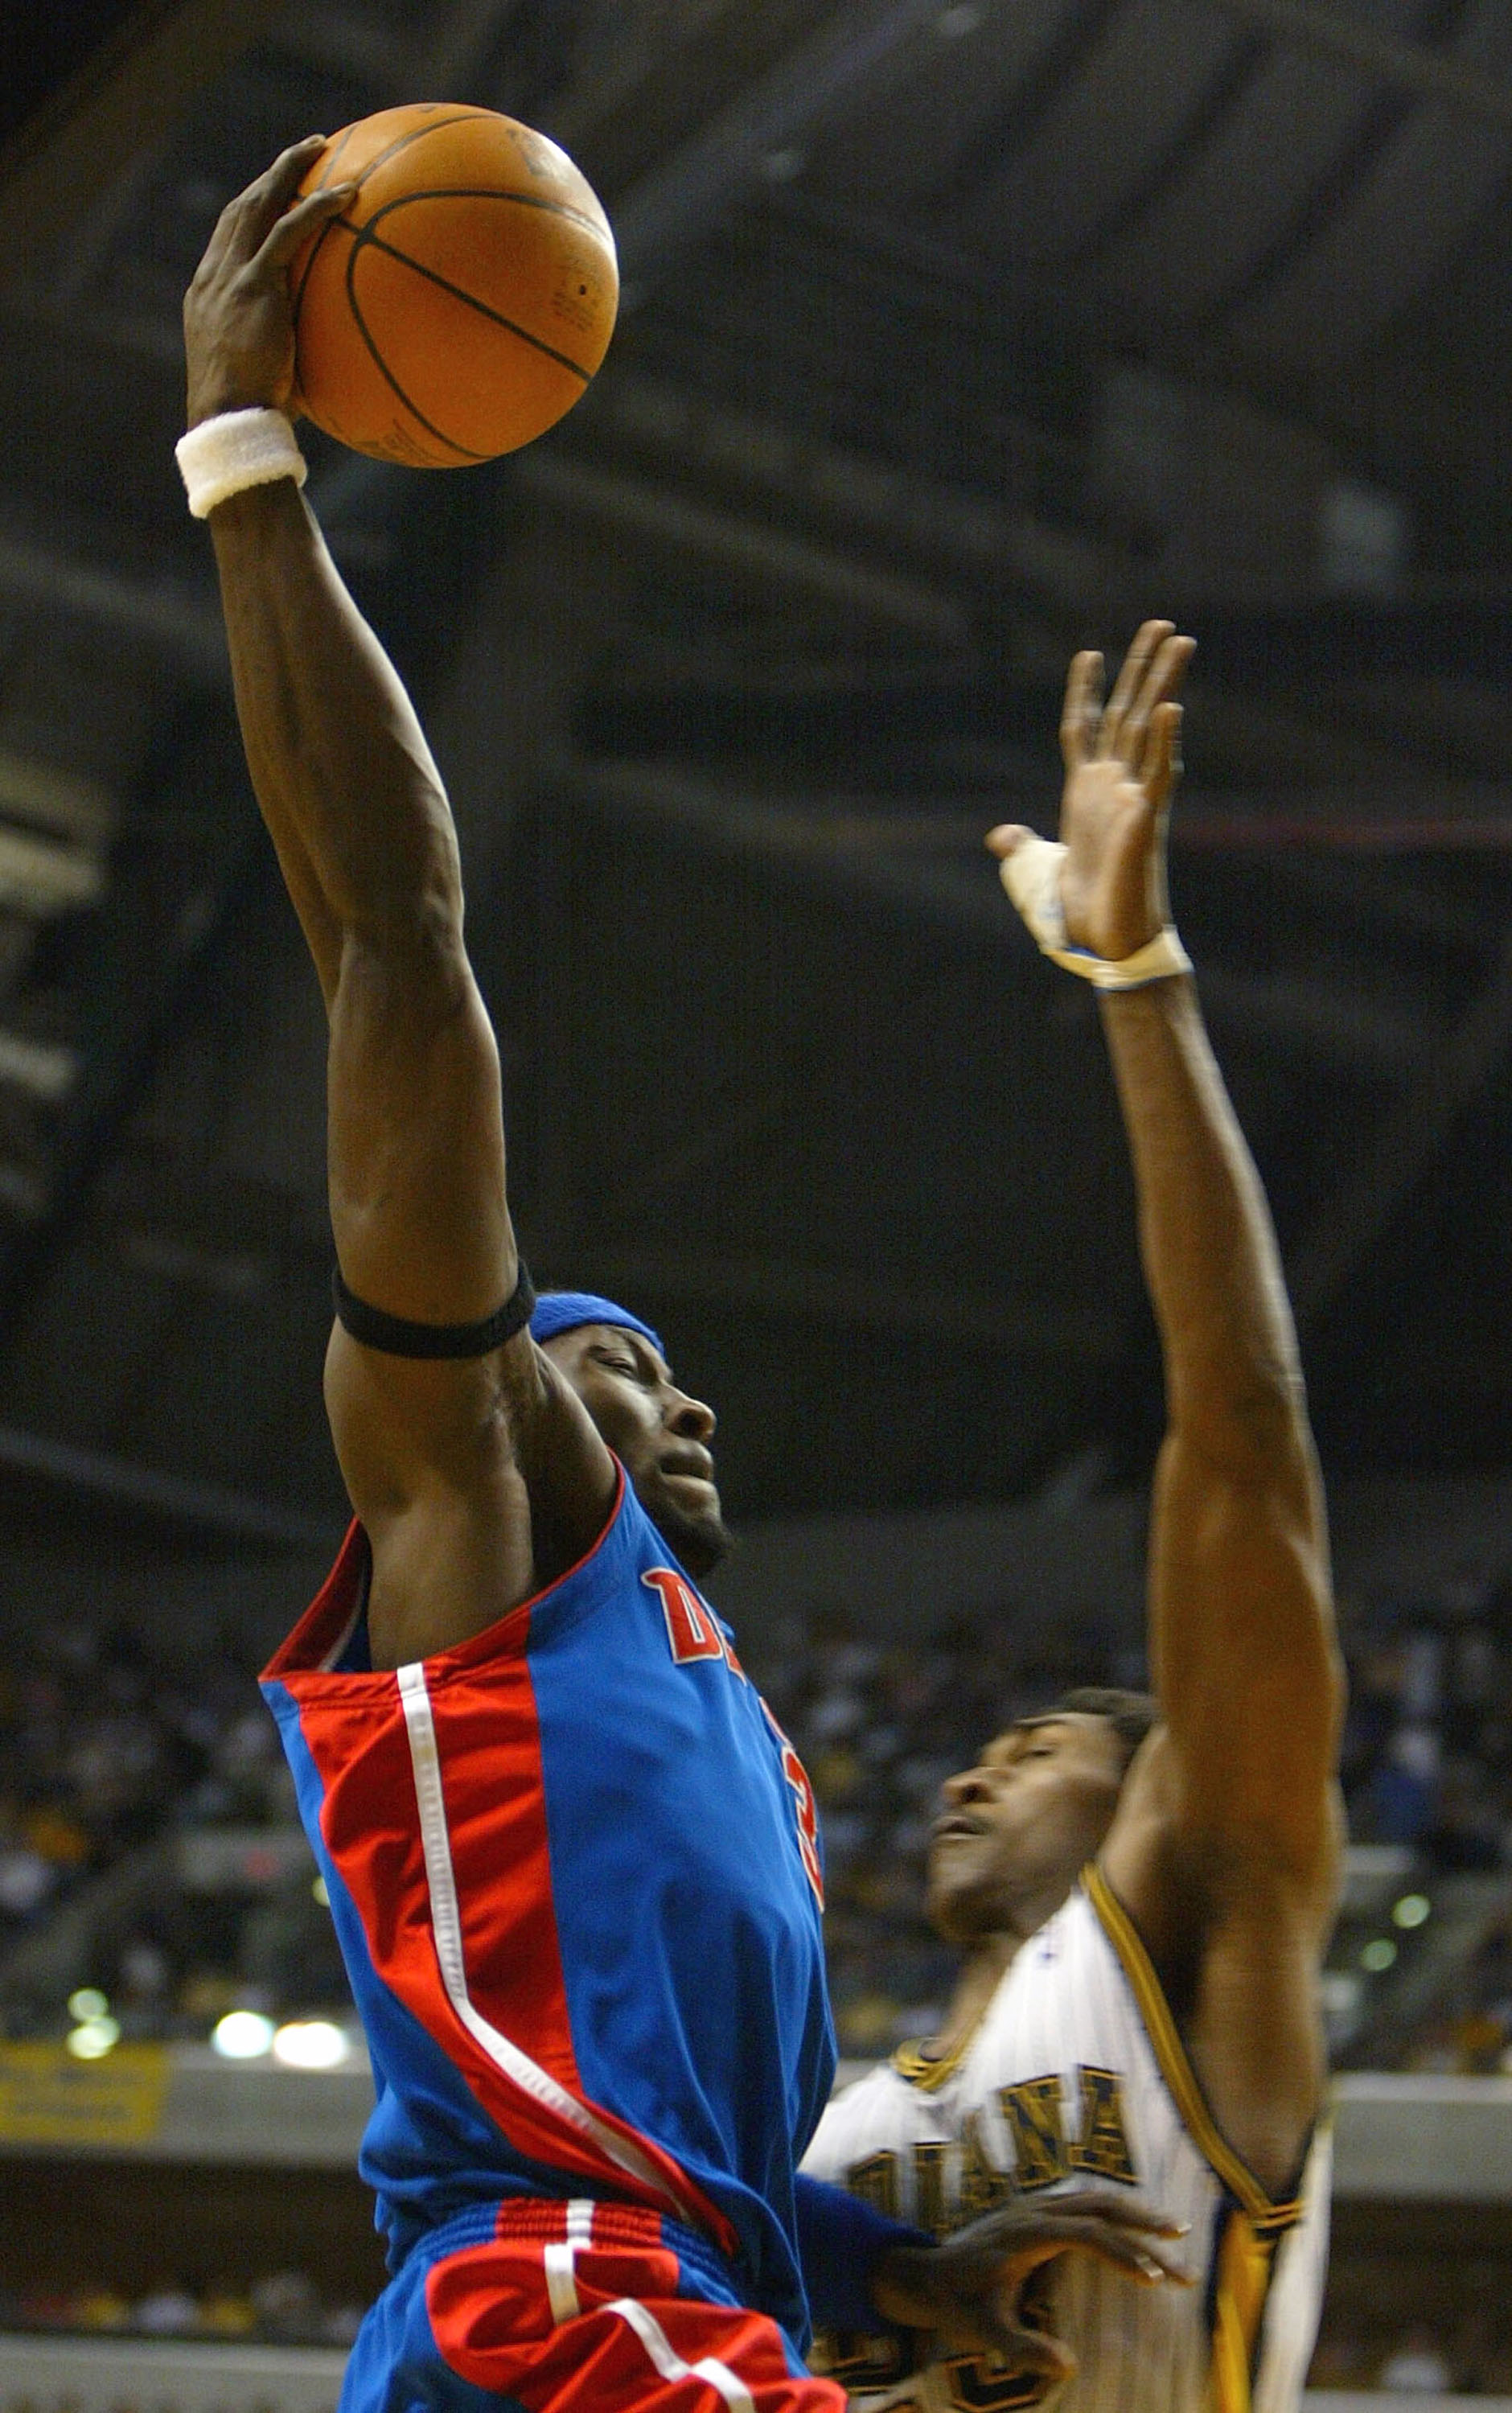 INDIANAPOLIS - MAY 24:  Ben Wallace #3 of the Detroit Pistons goes up for a basket over Ron Artest #23 of the Indiana Pacers in Game two of the Eastern Conference Finals during the 2004 NBA Playoffs at Conseco Fieldhouse on May 24, 2004 in Indianapolis, I